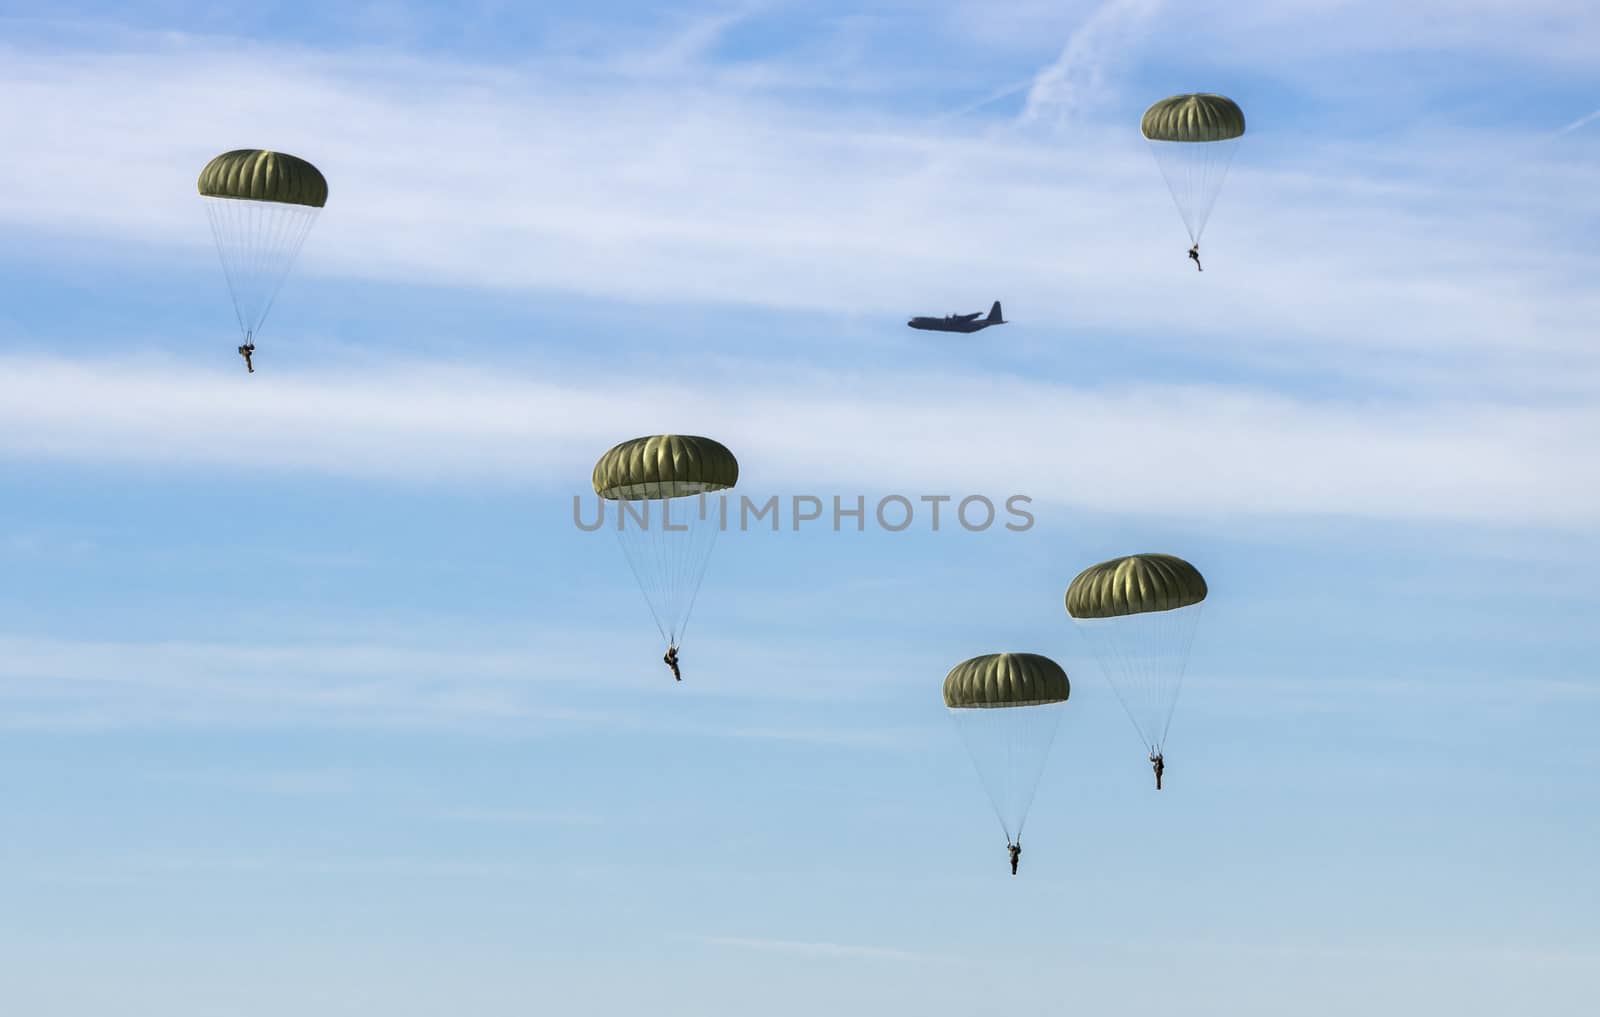 The airborne commemorations on Ginkel Heath with para drops by compuinfoto